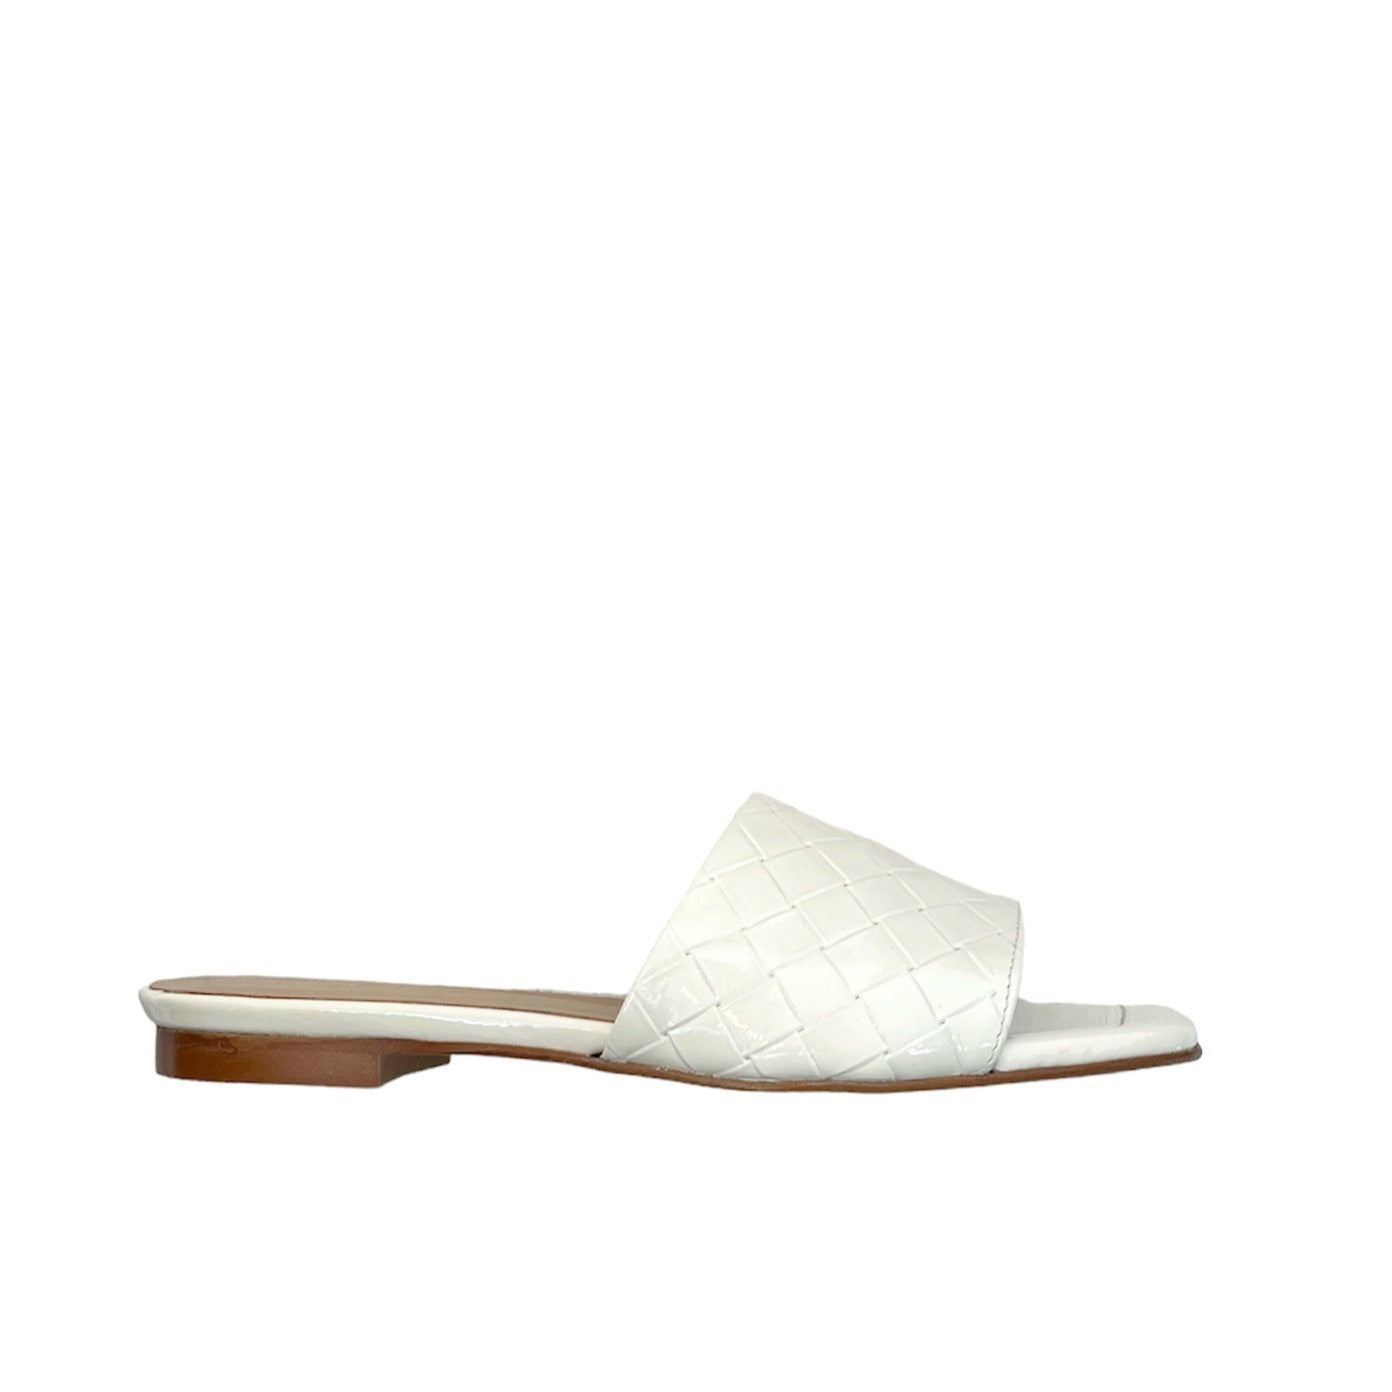 SISTER X SOEUR - BECKY SLIDE IN CREAM PATENT LEATHER